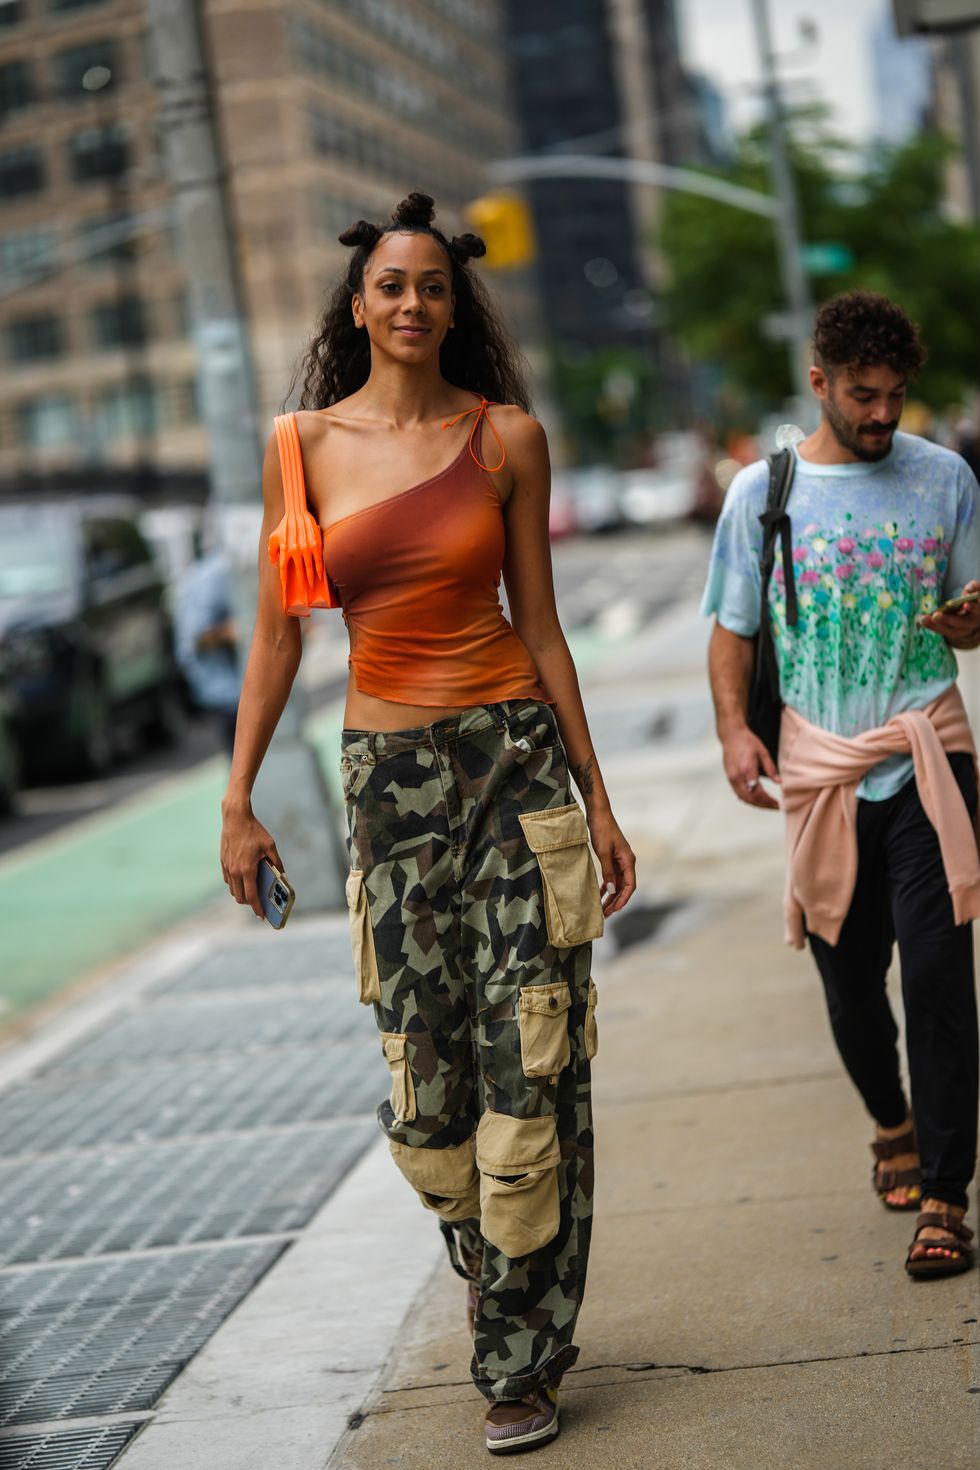 Best Tops To Wear With Cargo Pants For Women